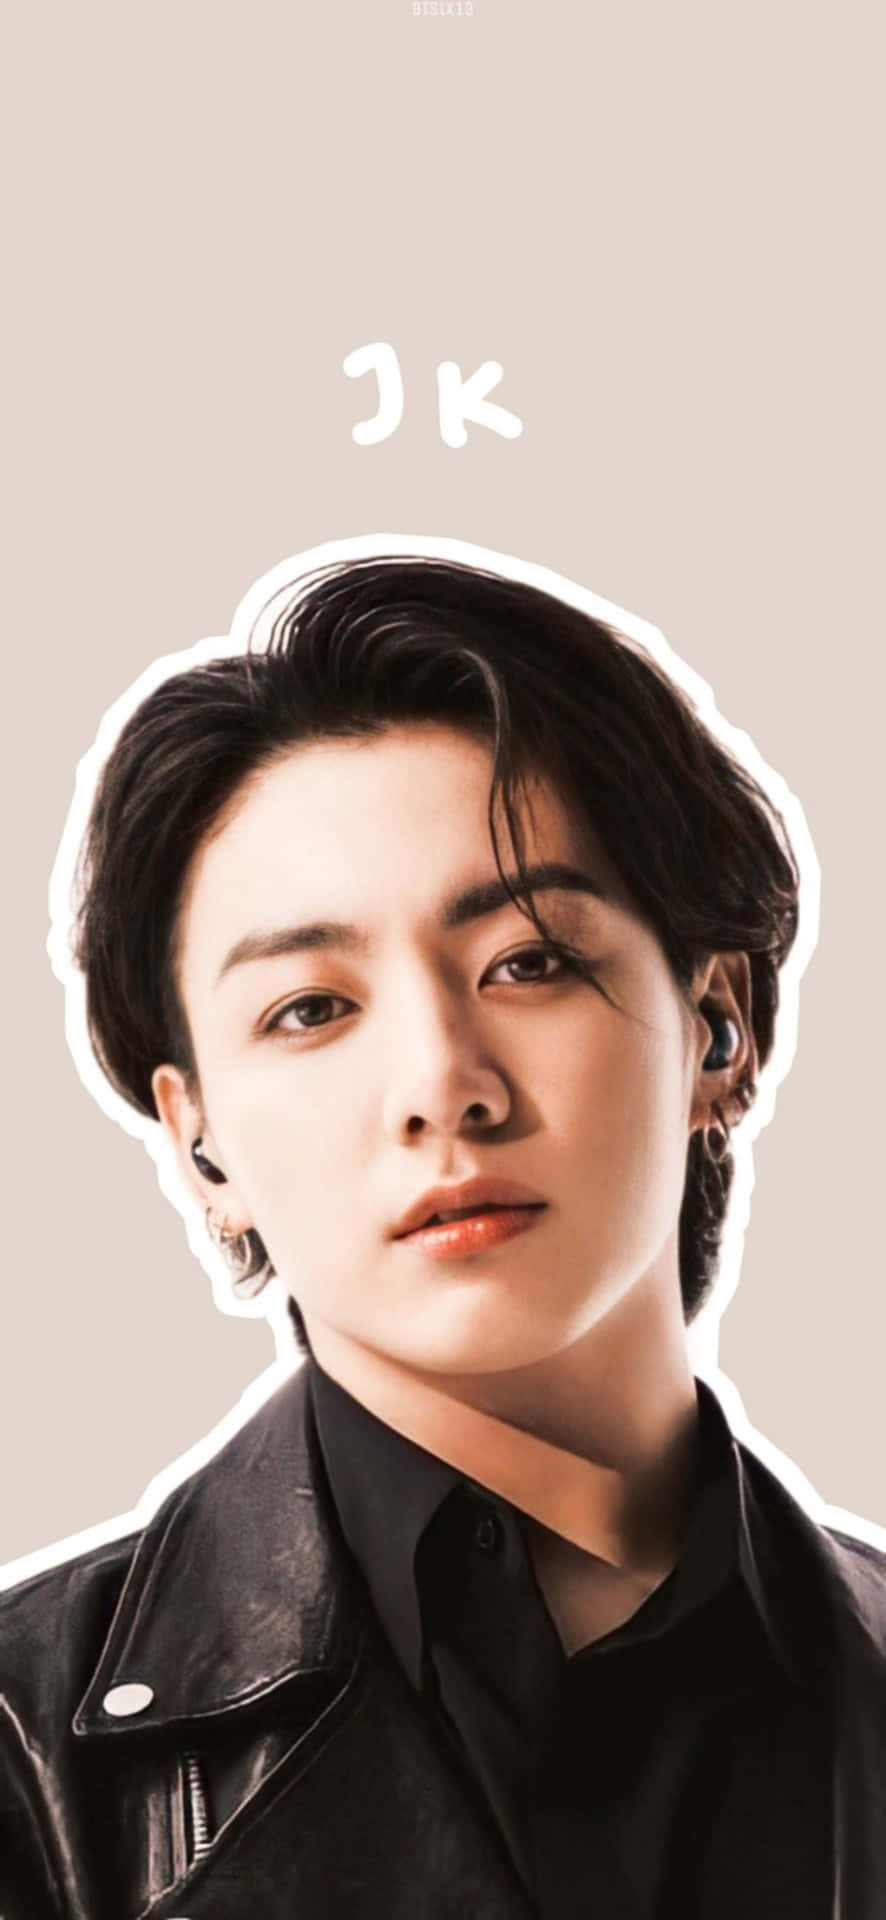 High Fidelity: BTS' Jungkook with Long Hair Wallpaper